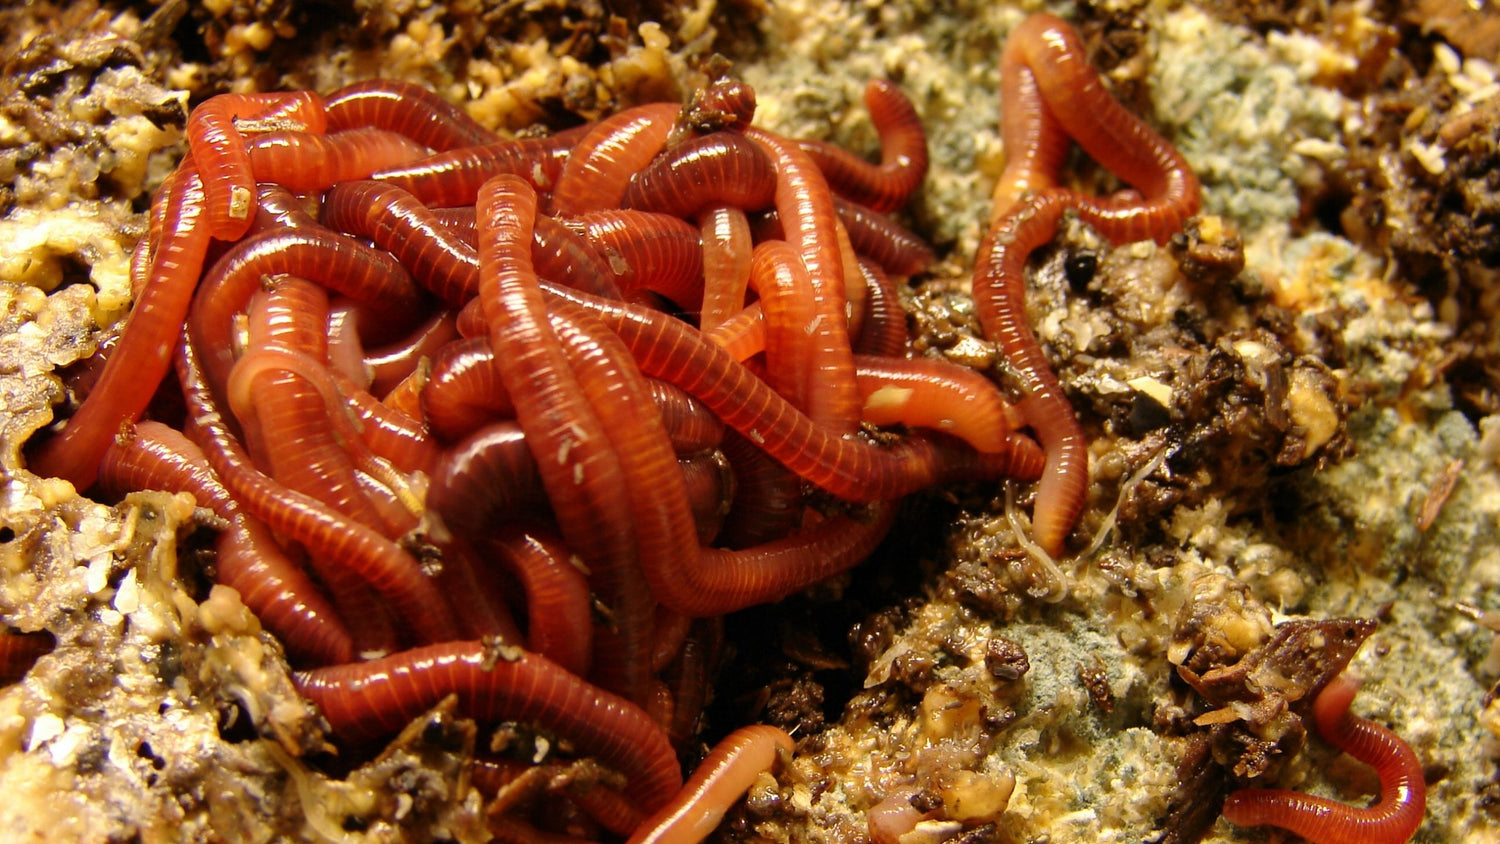 What Do Composting Worms Eat?